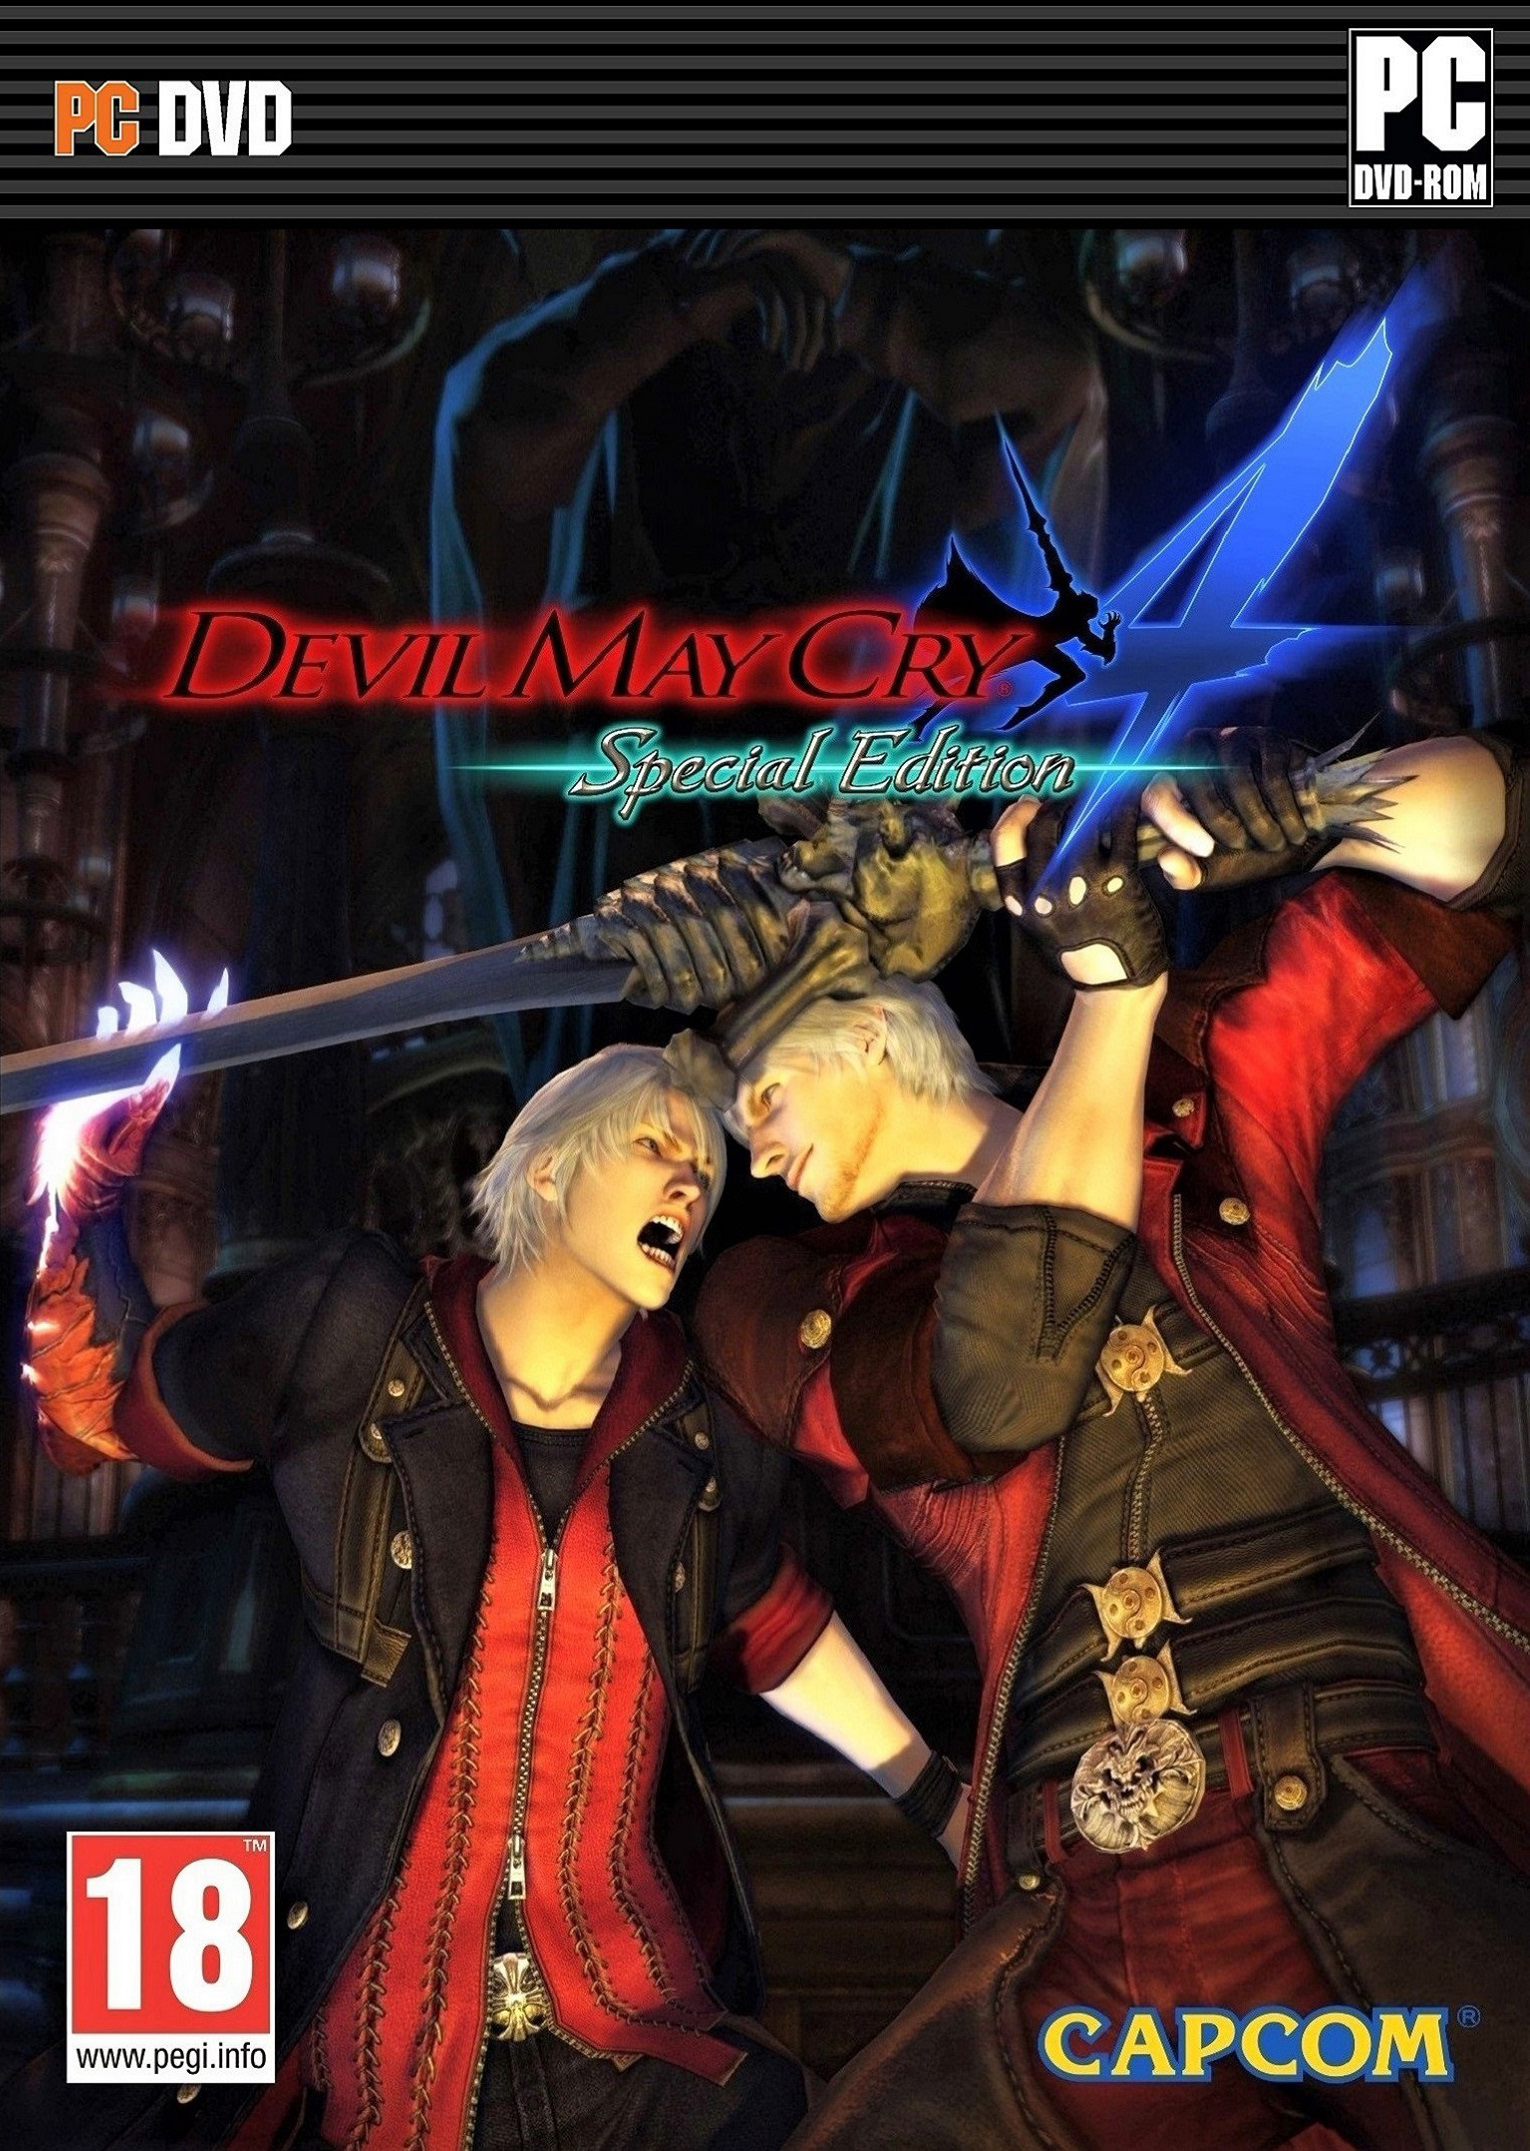 Devil May Cry 4 Special Edition All Cutscenes (Game Movie) 1080p HD 